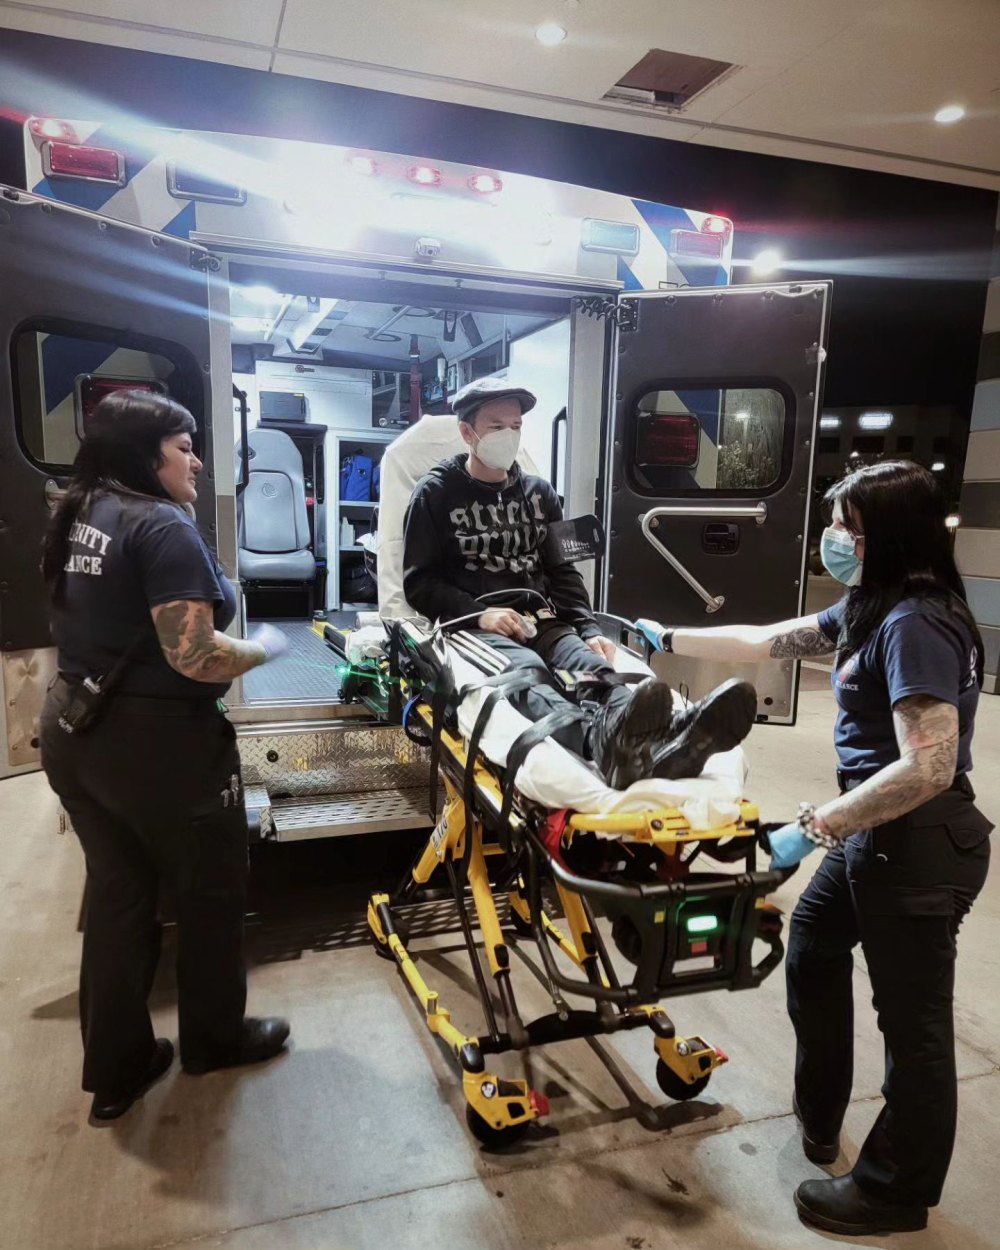 Sum 41 Frontman Deryck Whibley Discharged From Hospital After Pneumonia Battle, Wife Ari Says